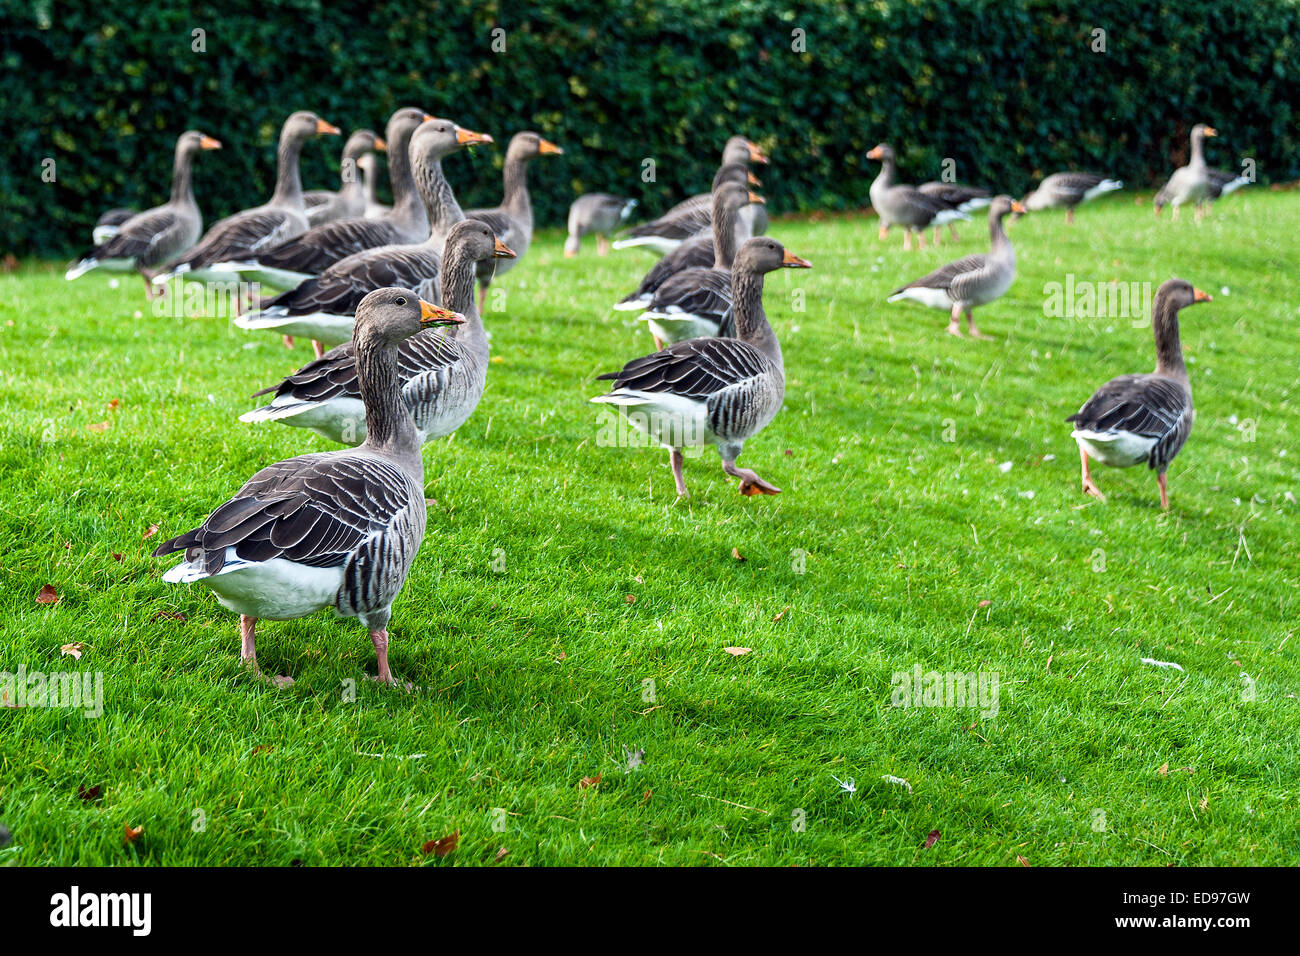 Flock of geese in London, UK Stock Photo